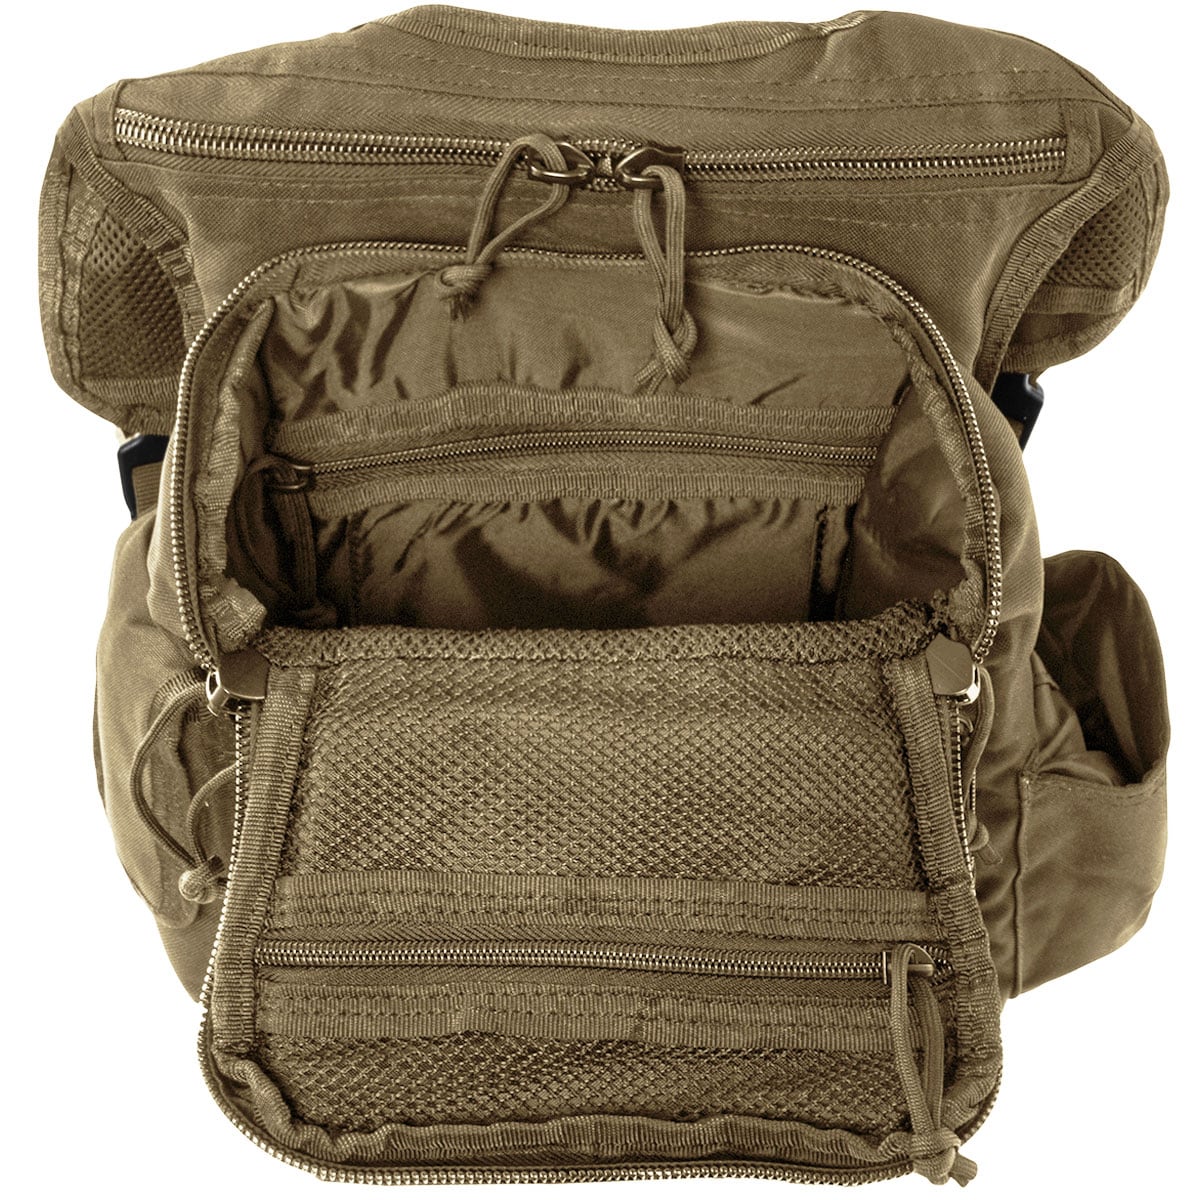 Сумка Voodoo Tactical Padded Concealment Bag 5 л - Coyote